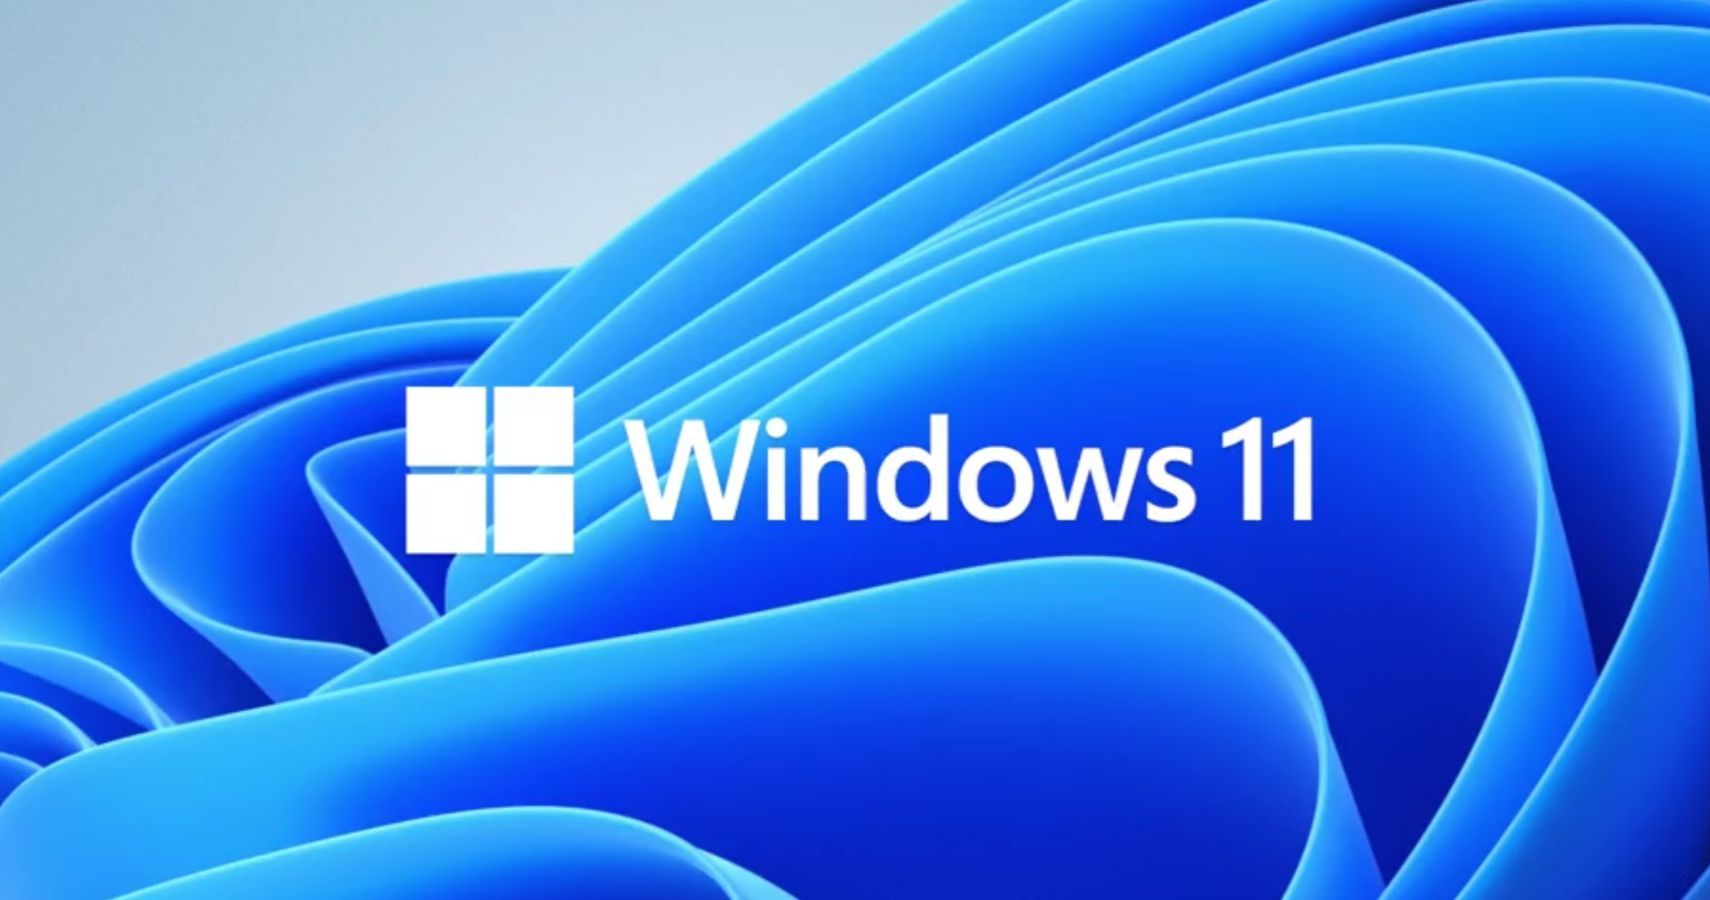 is windows 11 a free upgrade